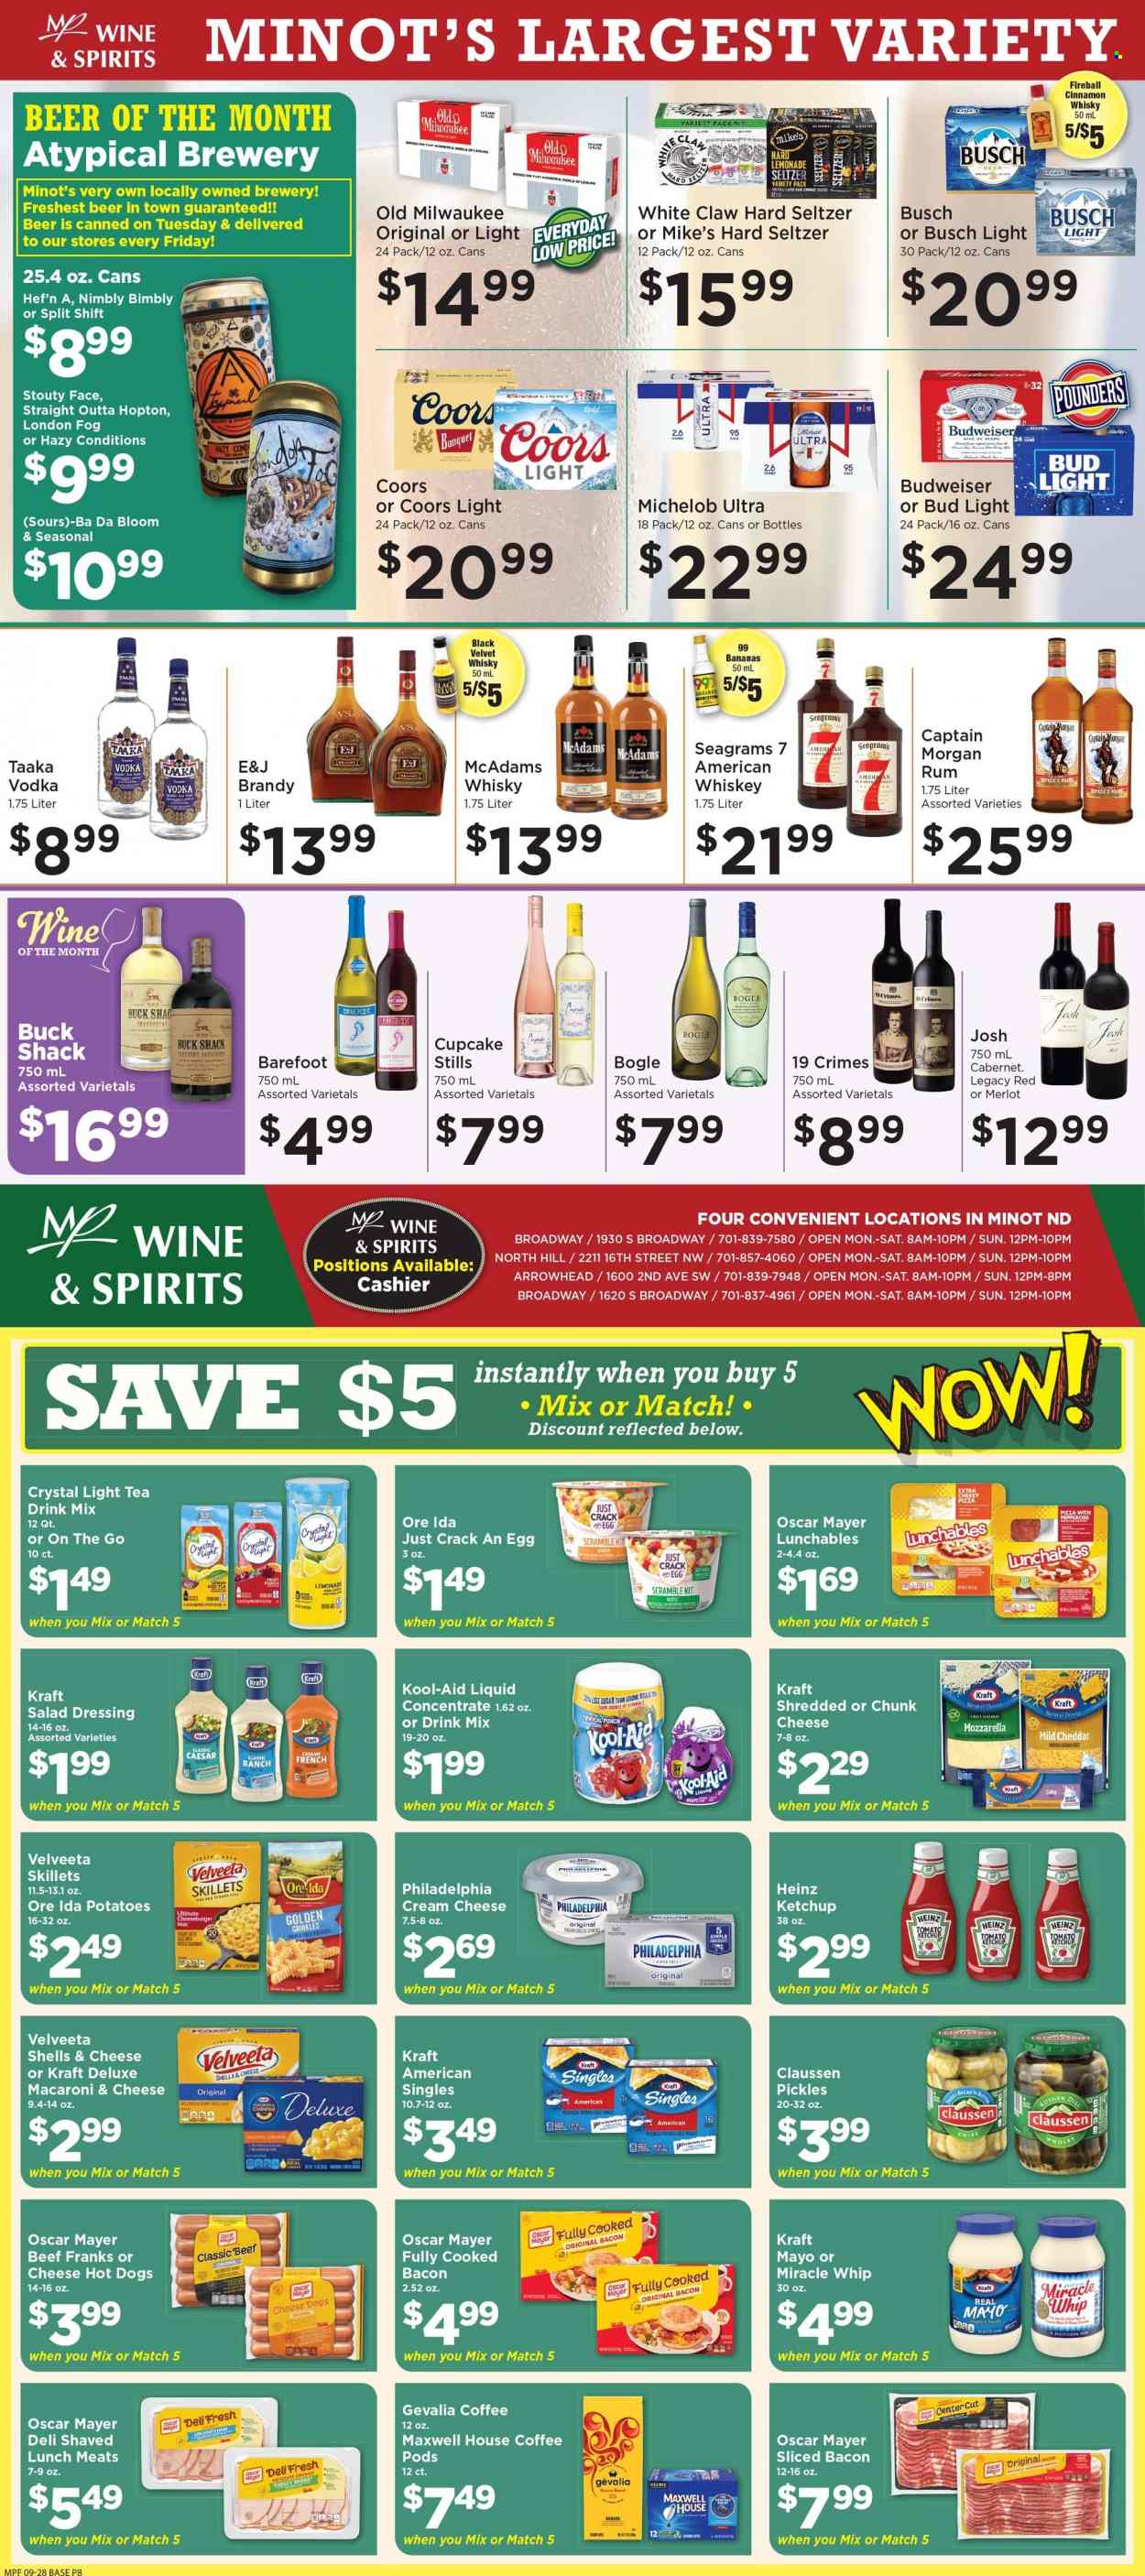 thumbnail - Marketplace Foods Flyer - 09/28/2022 - 10/04/2022 - Sales products - cupcake, sweet bread, potatoes, bananas, macaroni & cheese, hot dog, pizza, pasta, cheeseburger, Lunchables, Kraft®, bacon, ham, Oscar Mayer, pepperoni, cheese spread, Colby cheese, cream cheese, mild cheddar, sandwich slices, Kraft Singles, chunk cheese, shake, butter, mayonnaise, Miracle Whip, potato fries, Ore-Ida, chips, Heinz, pickles, dill, salad dressing, ketchup, dressing, ice tea, fruit punch, Maxwell House, coffee pods, Gevalia, Cabernet Sauvignon, red wine, white wine, Chardonnay, wine, Merlot, brandy, Captain Morgan, rum, spiced rum, vodka, whiskey, White Claw, Hard Seltzer, cinnamon whisky, whisky, beer, Busch, Bud Light, Budweiser, Coors, Michelob. Page 8.